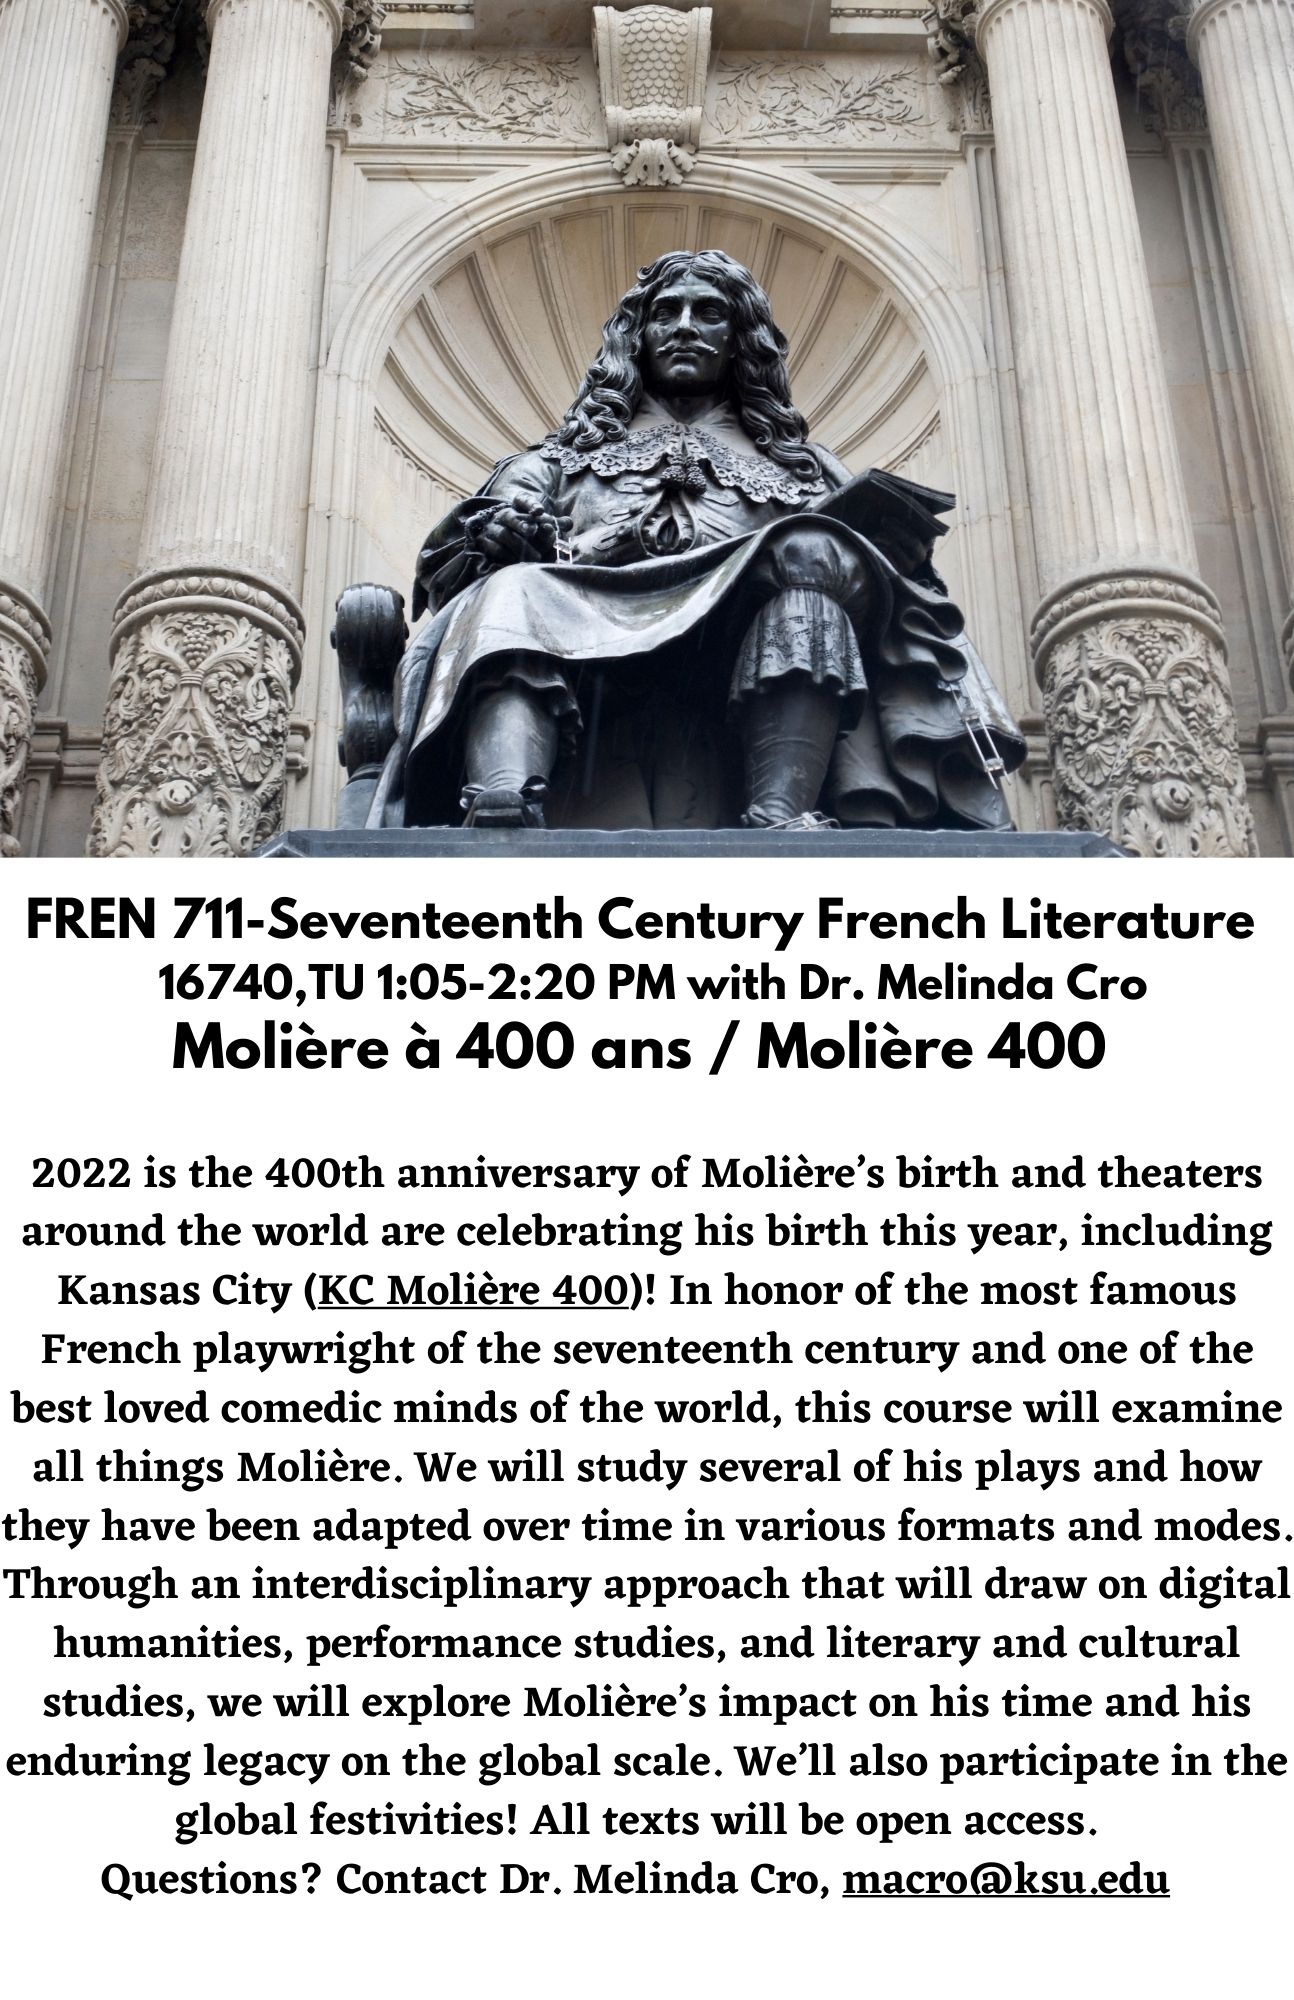 FREN 711-Seventeenth Century French Literature   16740,TU 1:05-2:20 PM with Dr. Melinda Cro Molière à 400 ans / Molière 400. 2022 is the 400th anniversary of Molière’s birth and theaters around the world are celebrating his birth this year, including Kansas City (KC Molière 400)! In honor of the most famous French playwright of the seventeenth century and one of the best loved comedic minds of the world, this course will examine all things Molière. We will study several of his plays and how they have been adapted over time in various formats and modes. Through an interdisciplinary approach that will draw on digital humanities, performance studies, and literary and cultural studies, we will explore Molière’s impact on his time and his enduring legacy on the global scale. We’ll also participate in the global festivities! All texts will be open access.   Questions? Contact Dr. Melinda Cro, macro@ksu.edu